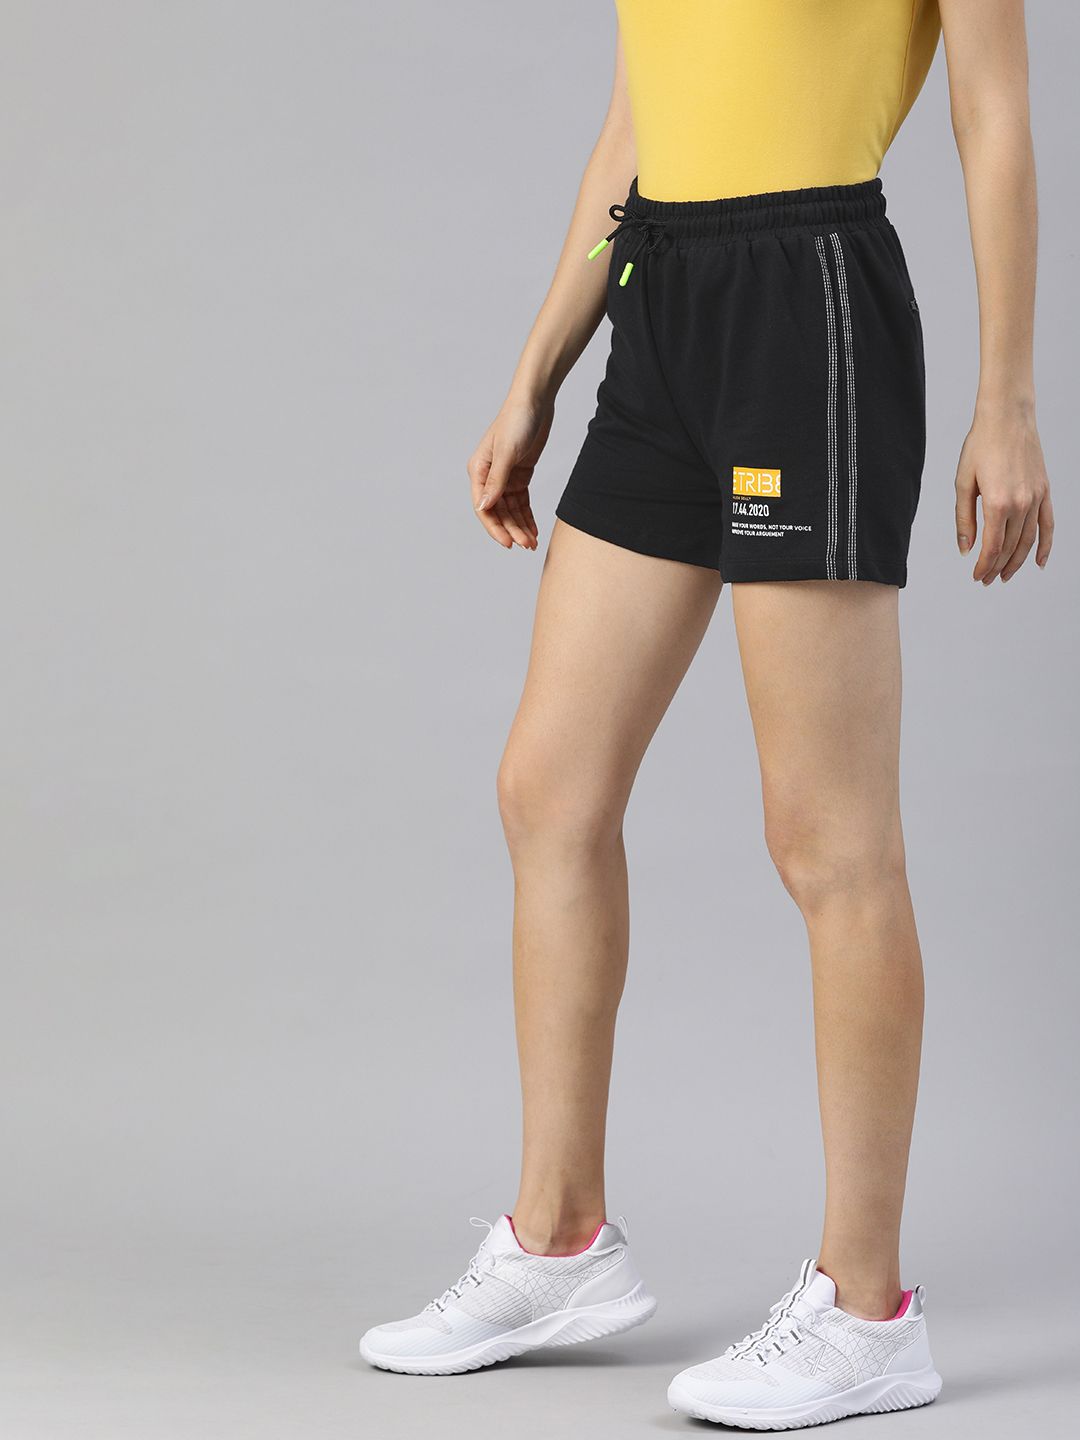 Allen Solly Tribe Women Black Solid Regular Fit Sports Shorts Price in India